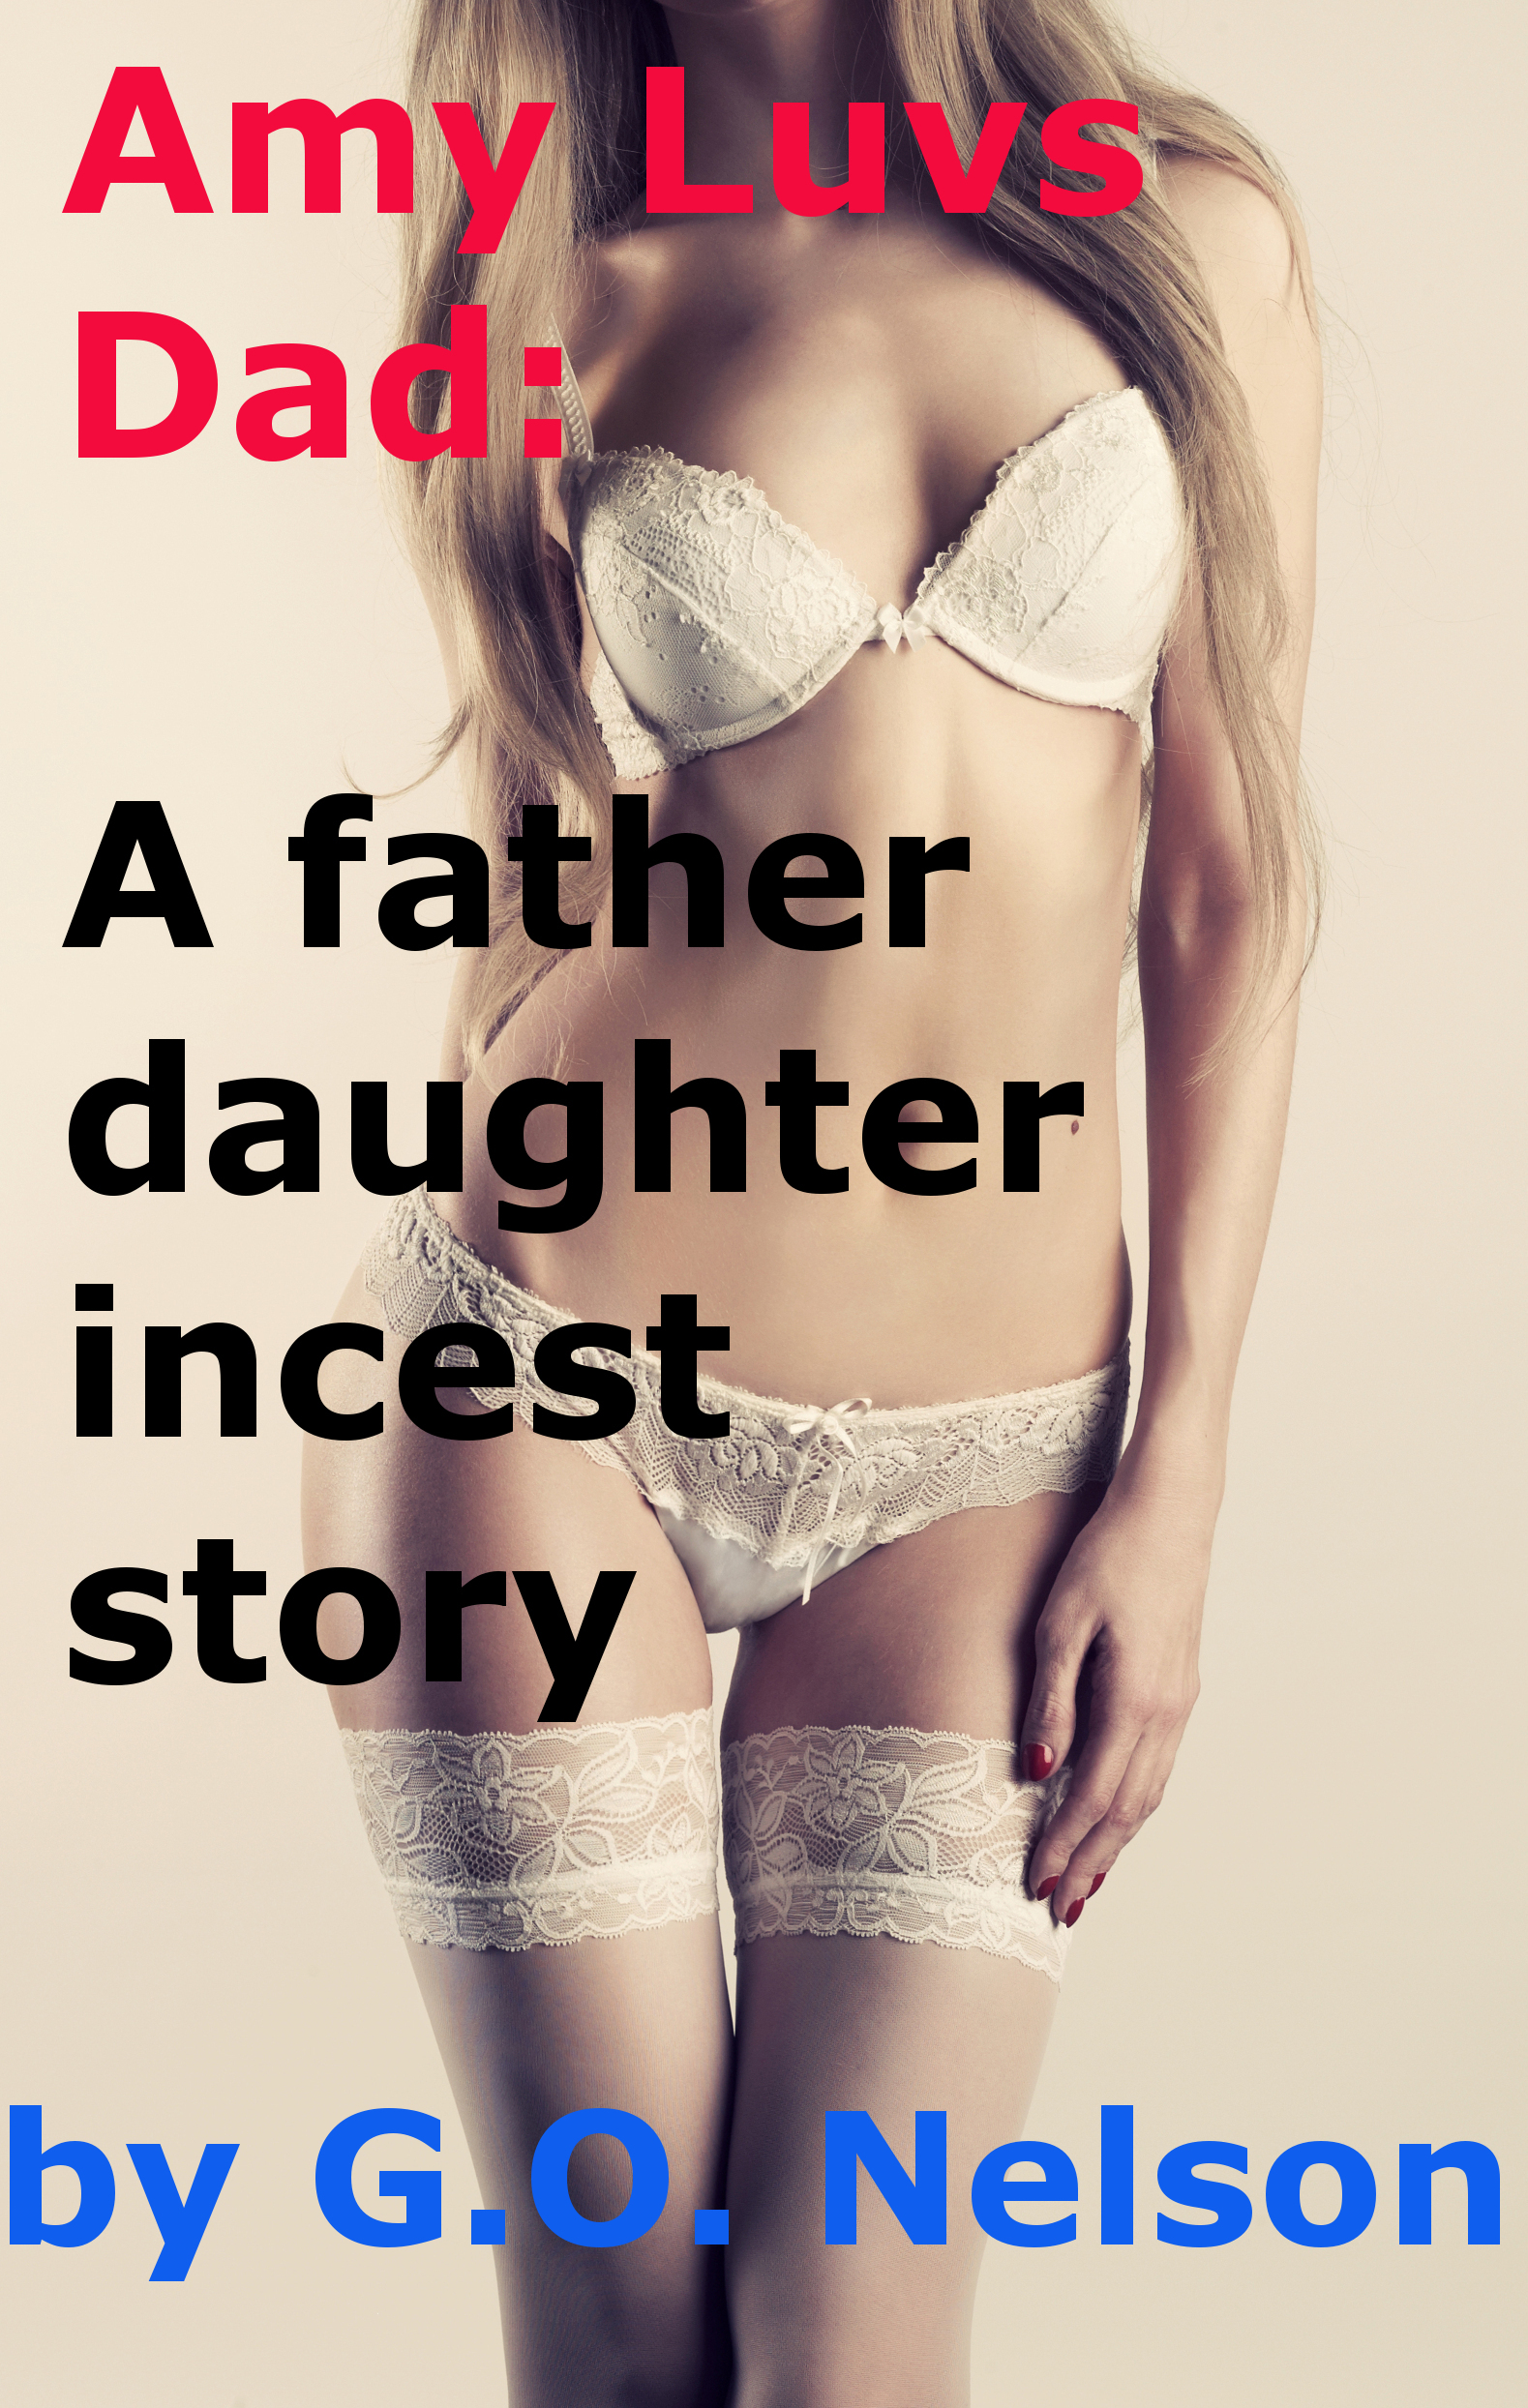 bob perillo share father daughter incest stories photos